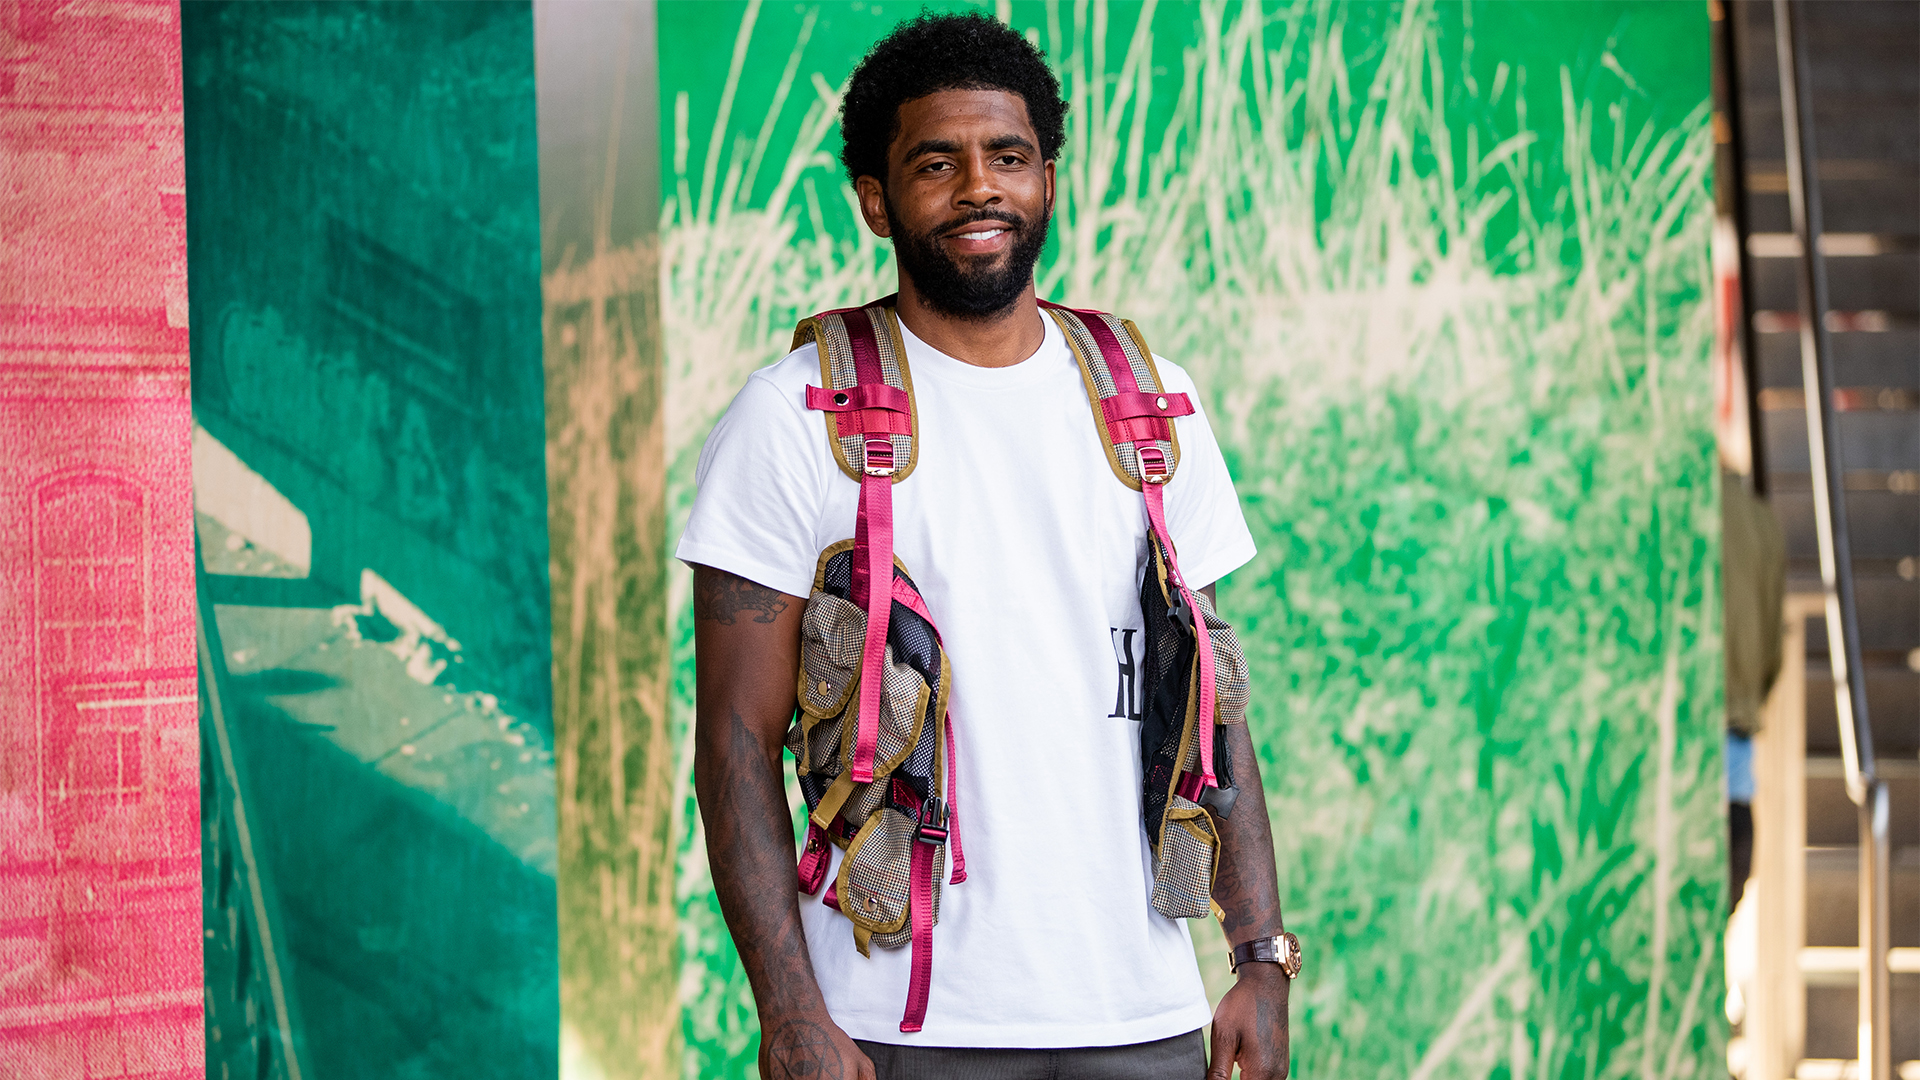 The Business Of Kyrie Irving: How The NBA Star Amassed A $90M Net Worth While Paying It Forward